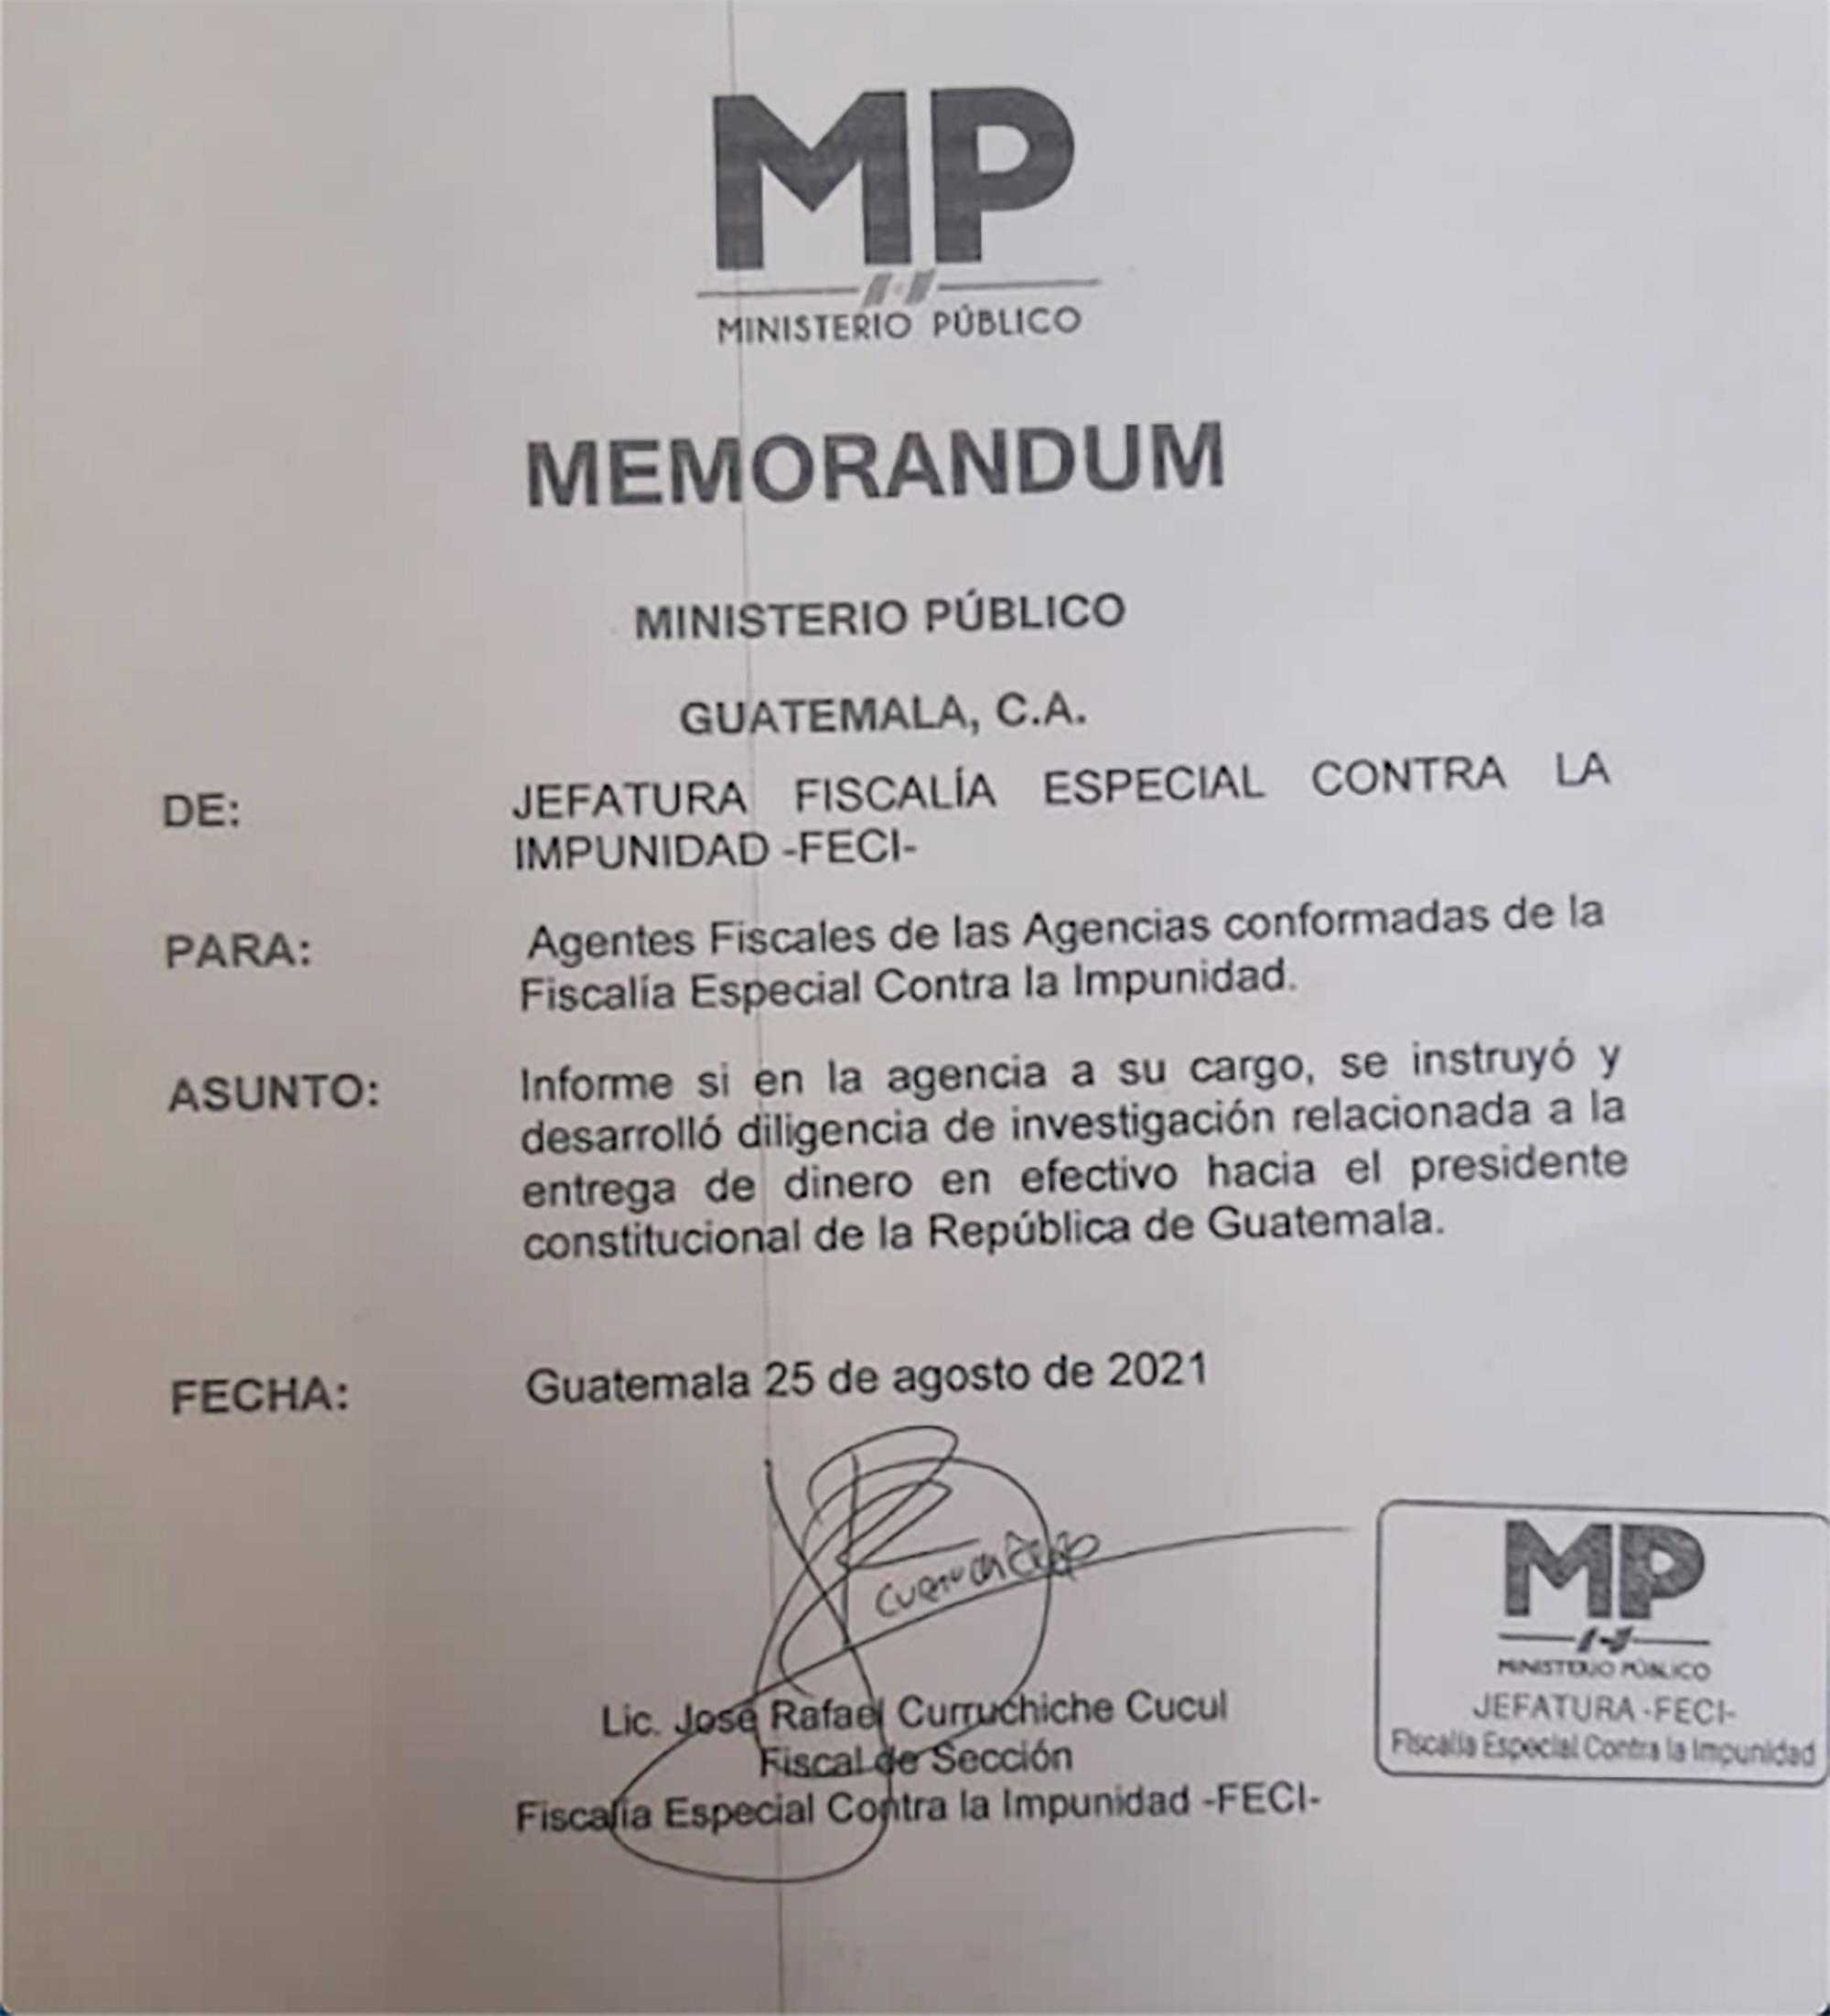 Copy of the memo sent by the head of the FECI, Rafael Curruchiche, on Aug. 25, 2021 demanding that his personnel inform him of any investigation into cash payments to President Alejandro Giammattei. Photo: El Faro